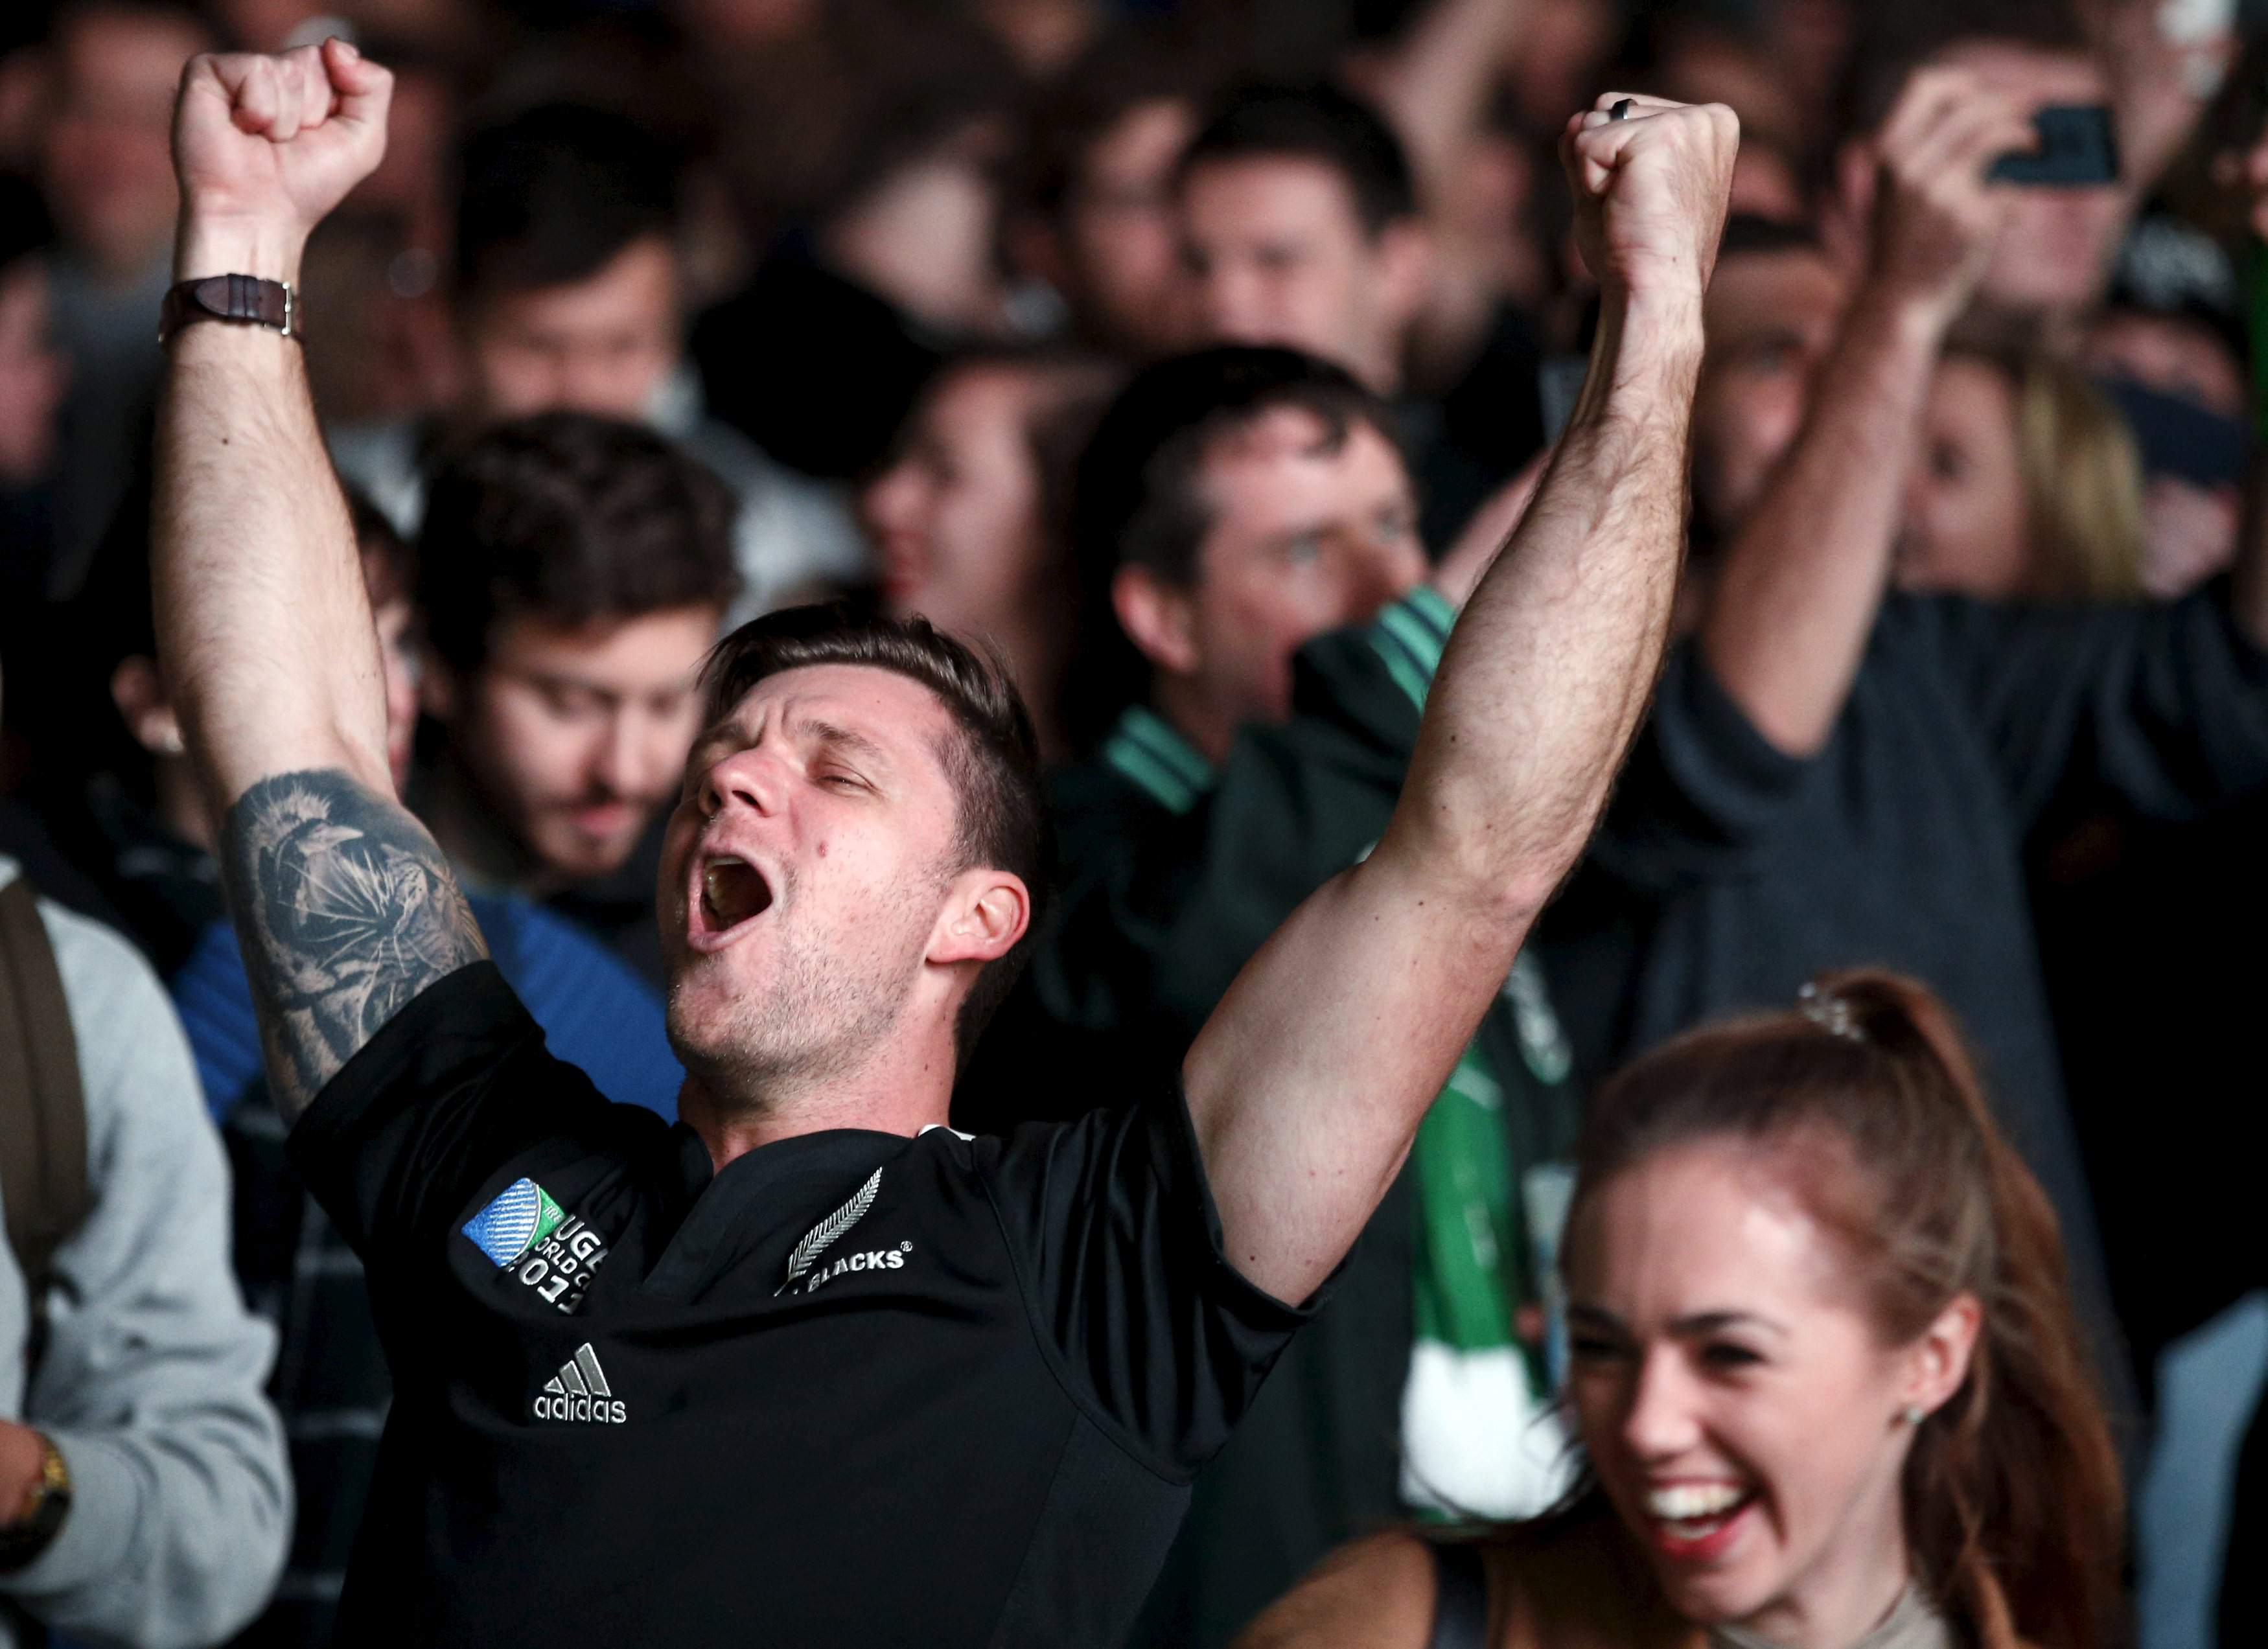 New Zealand All Blacks rugby fans celebrate their Rugby World Cup final win against Australia's Wallabies at a fan-zone in Trafalgar Square, in London, Britain, October 31, 2015.  REUTERS/Peter Nicholls   Picture Supplied by Action Images